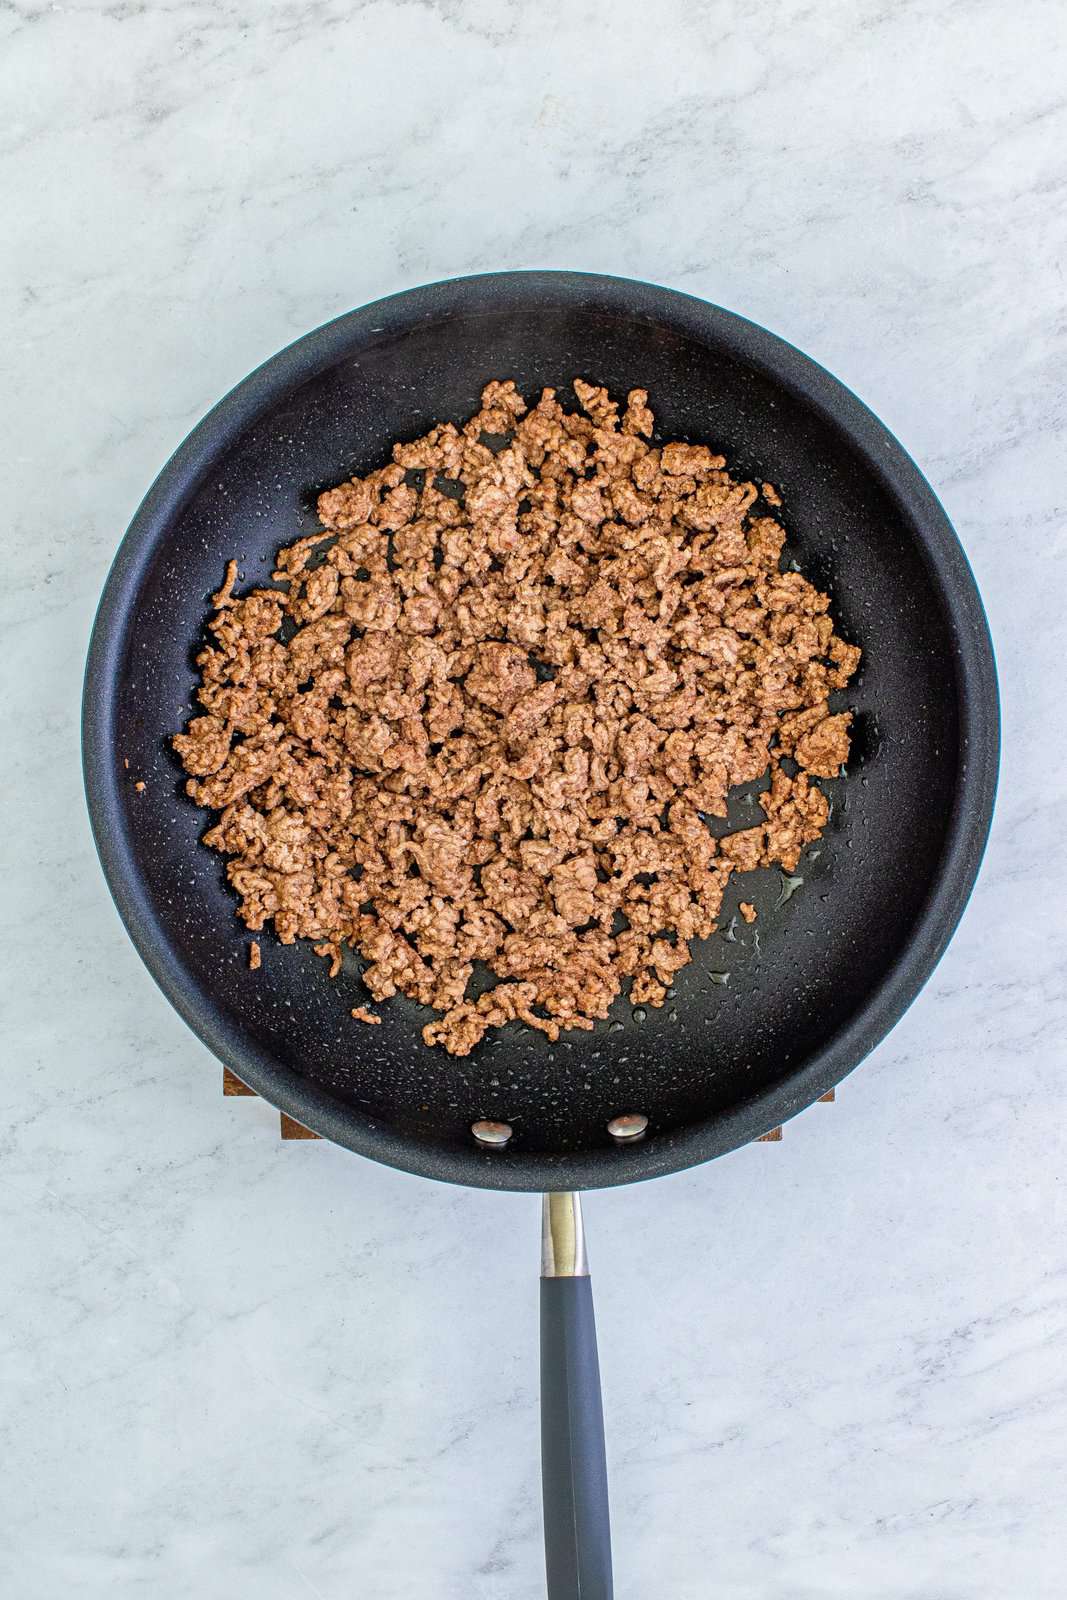 browning ground beef in skillet.